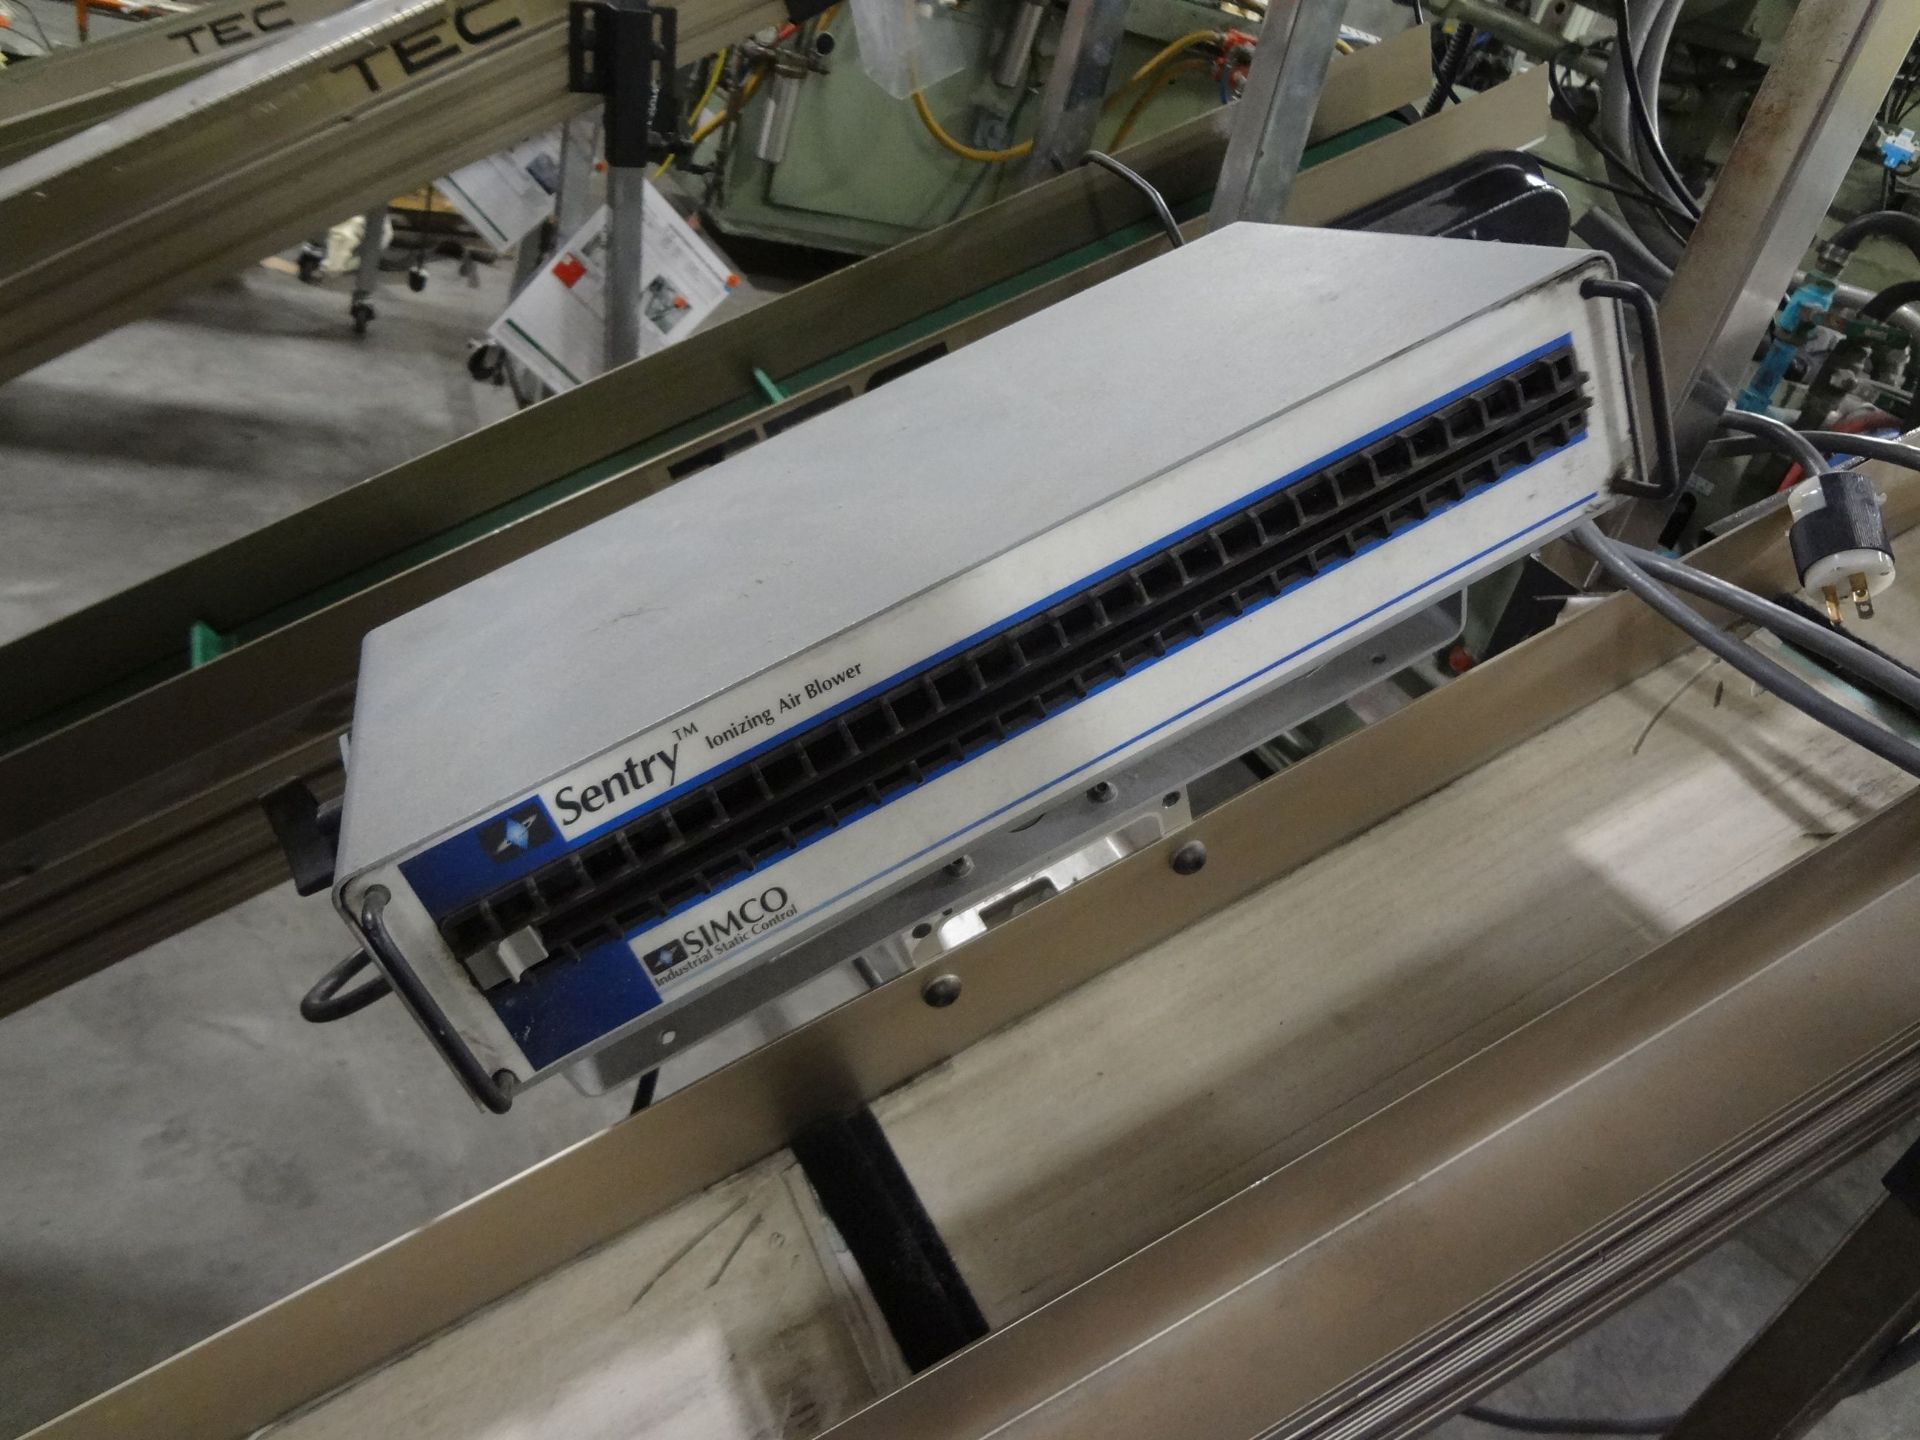 6" X 108" TEC MODEL HI626 HORIZONTAL TO INCLINED CLEATED BELT CONVEYOR; S/N 91-1126-2, 120 VOLT - Image 4 of 5